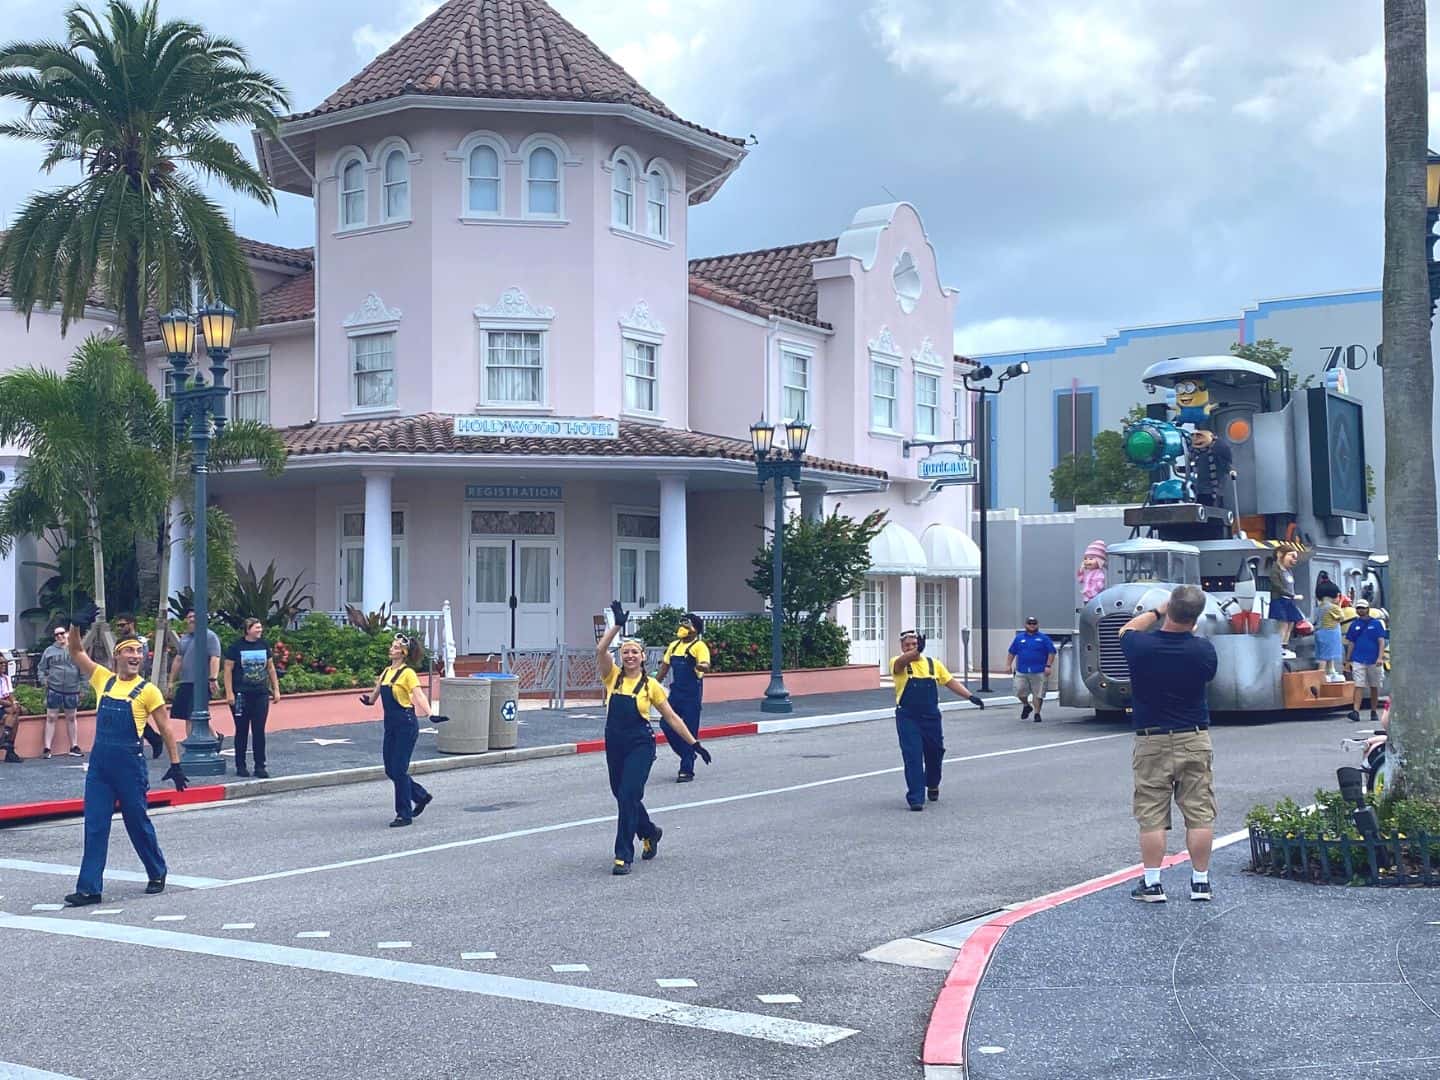 Minions Character Party Zone at Universal Studios Florida with performers dressed as Minions and a Despicable Me parade float